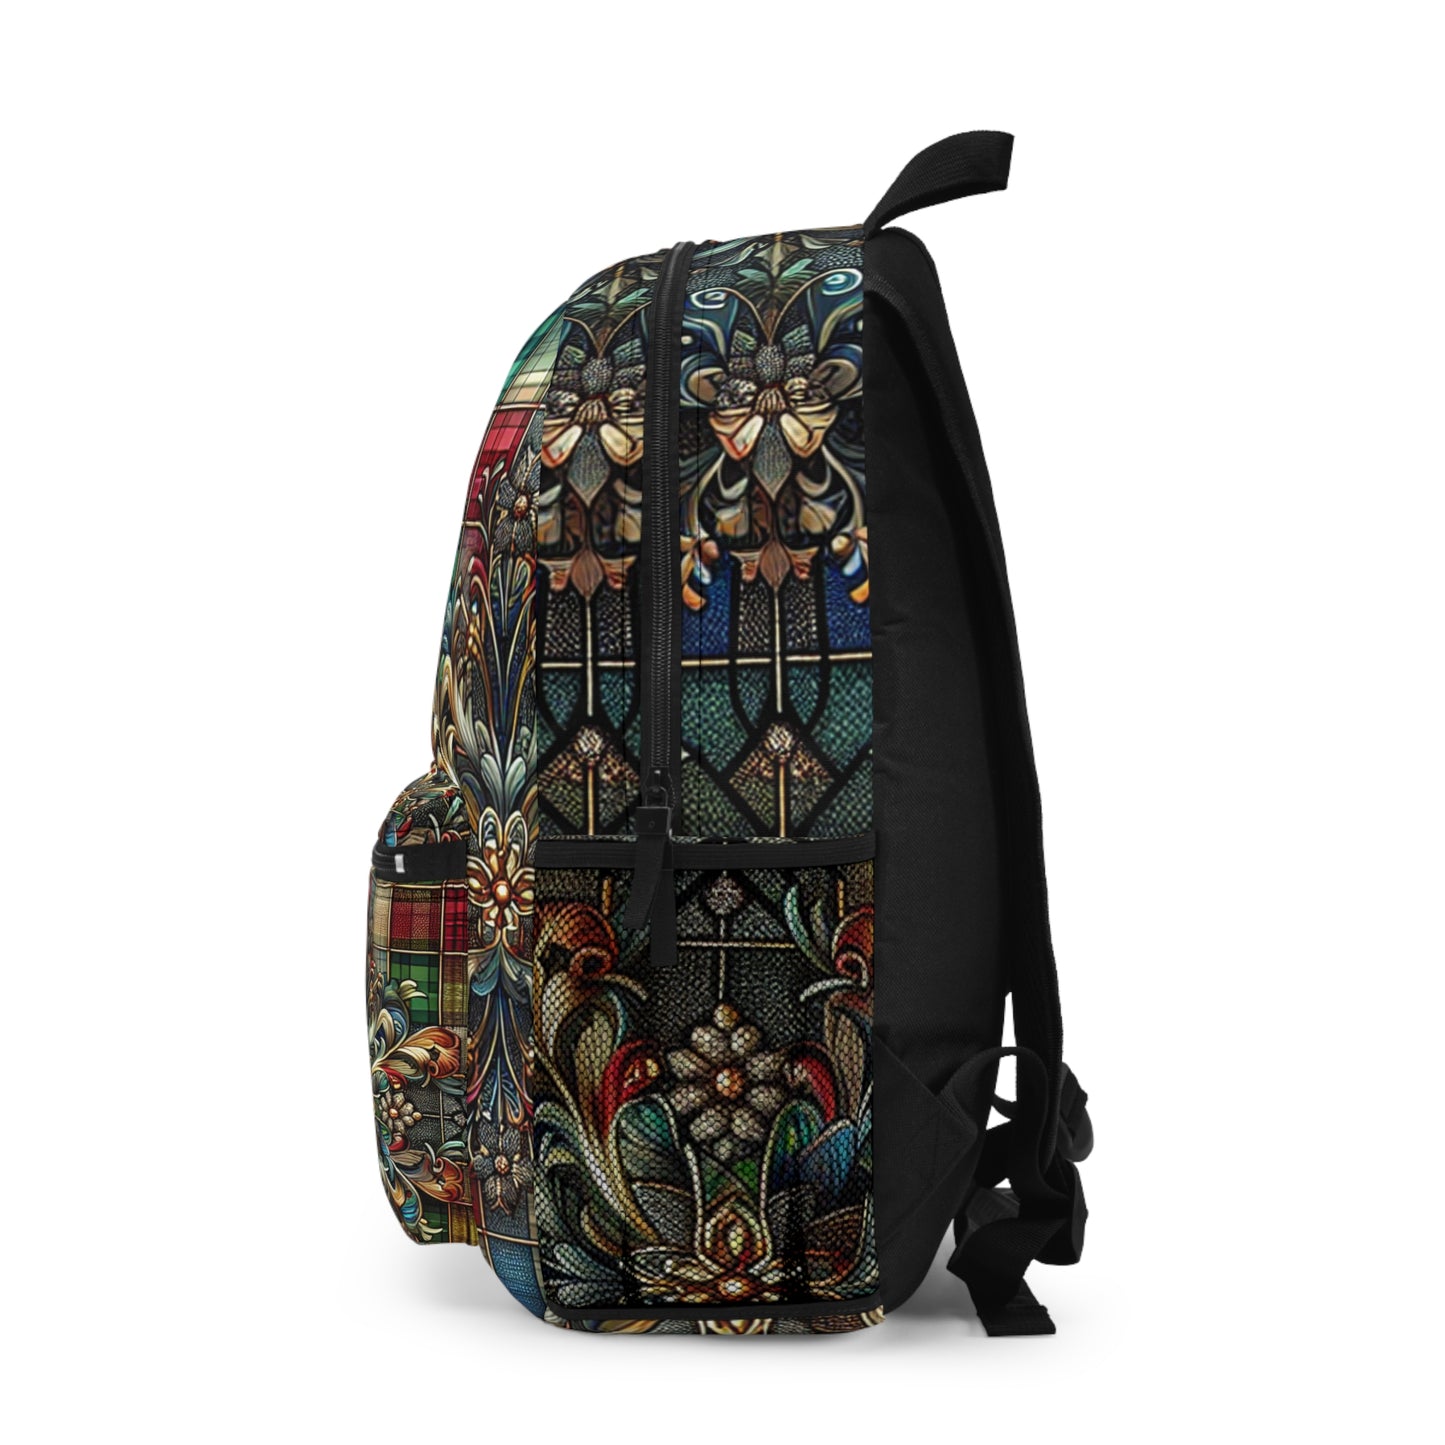 Giovanni Belletto - Backpack